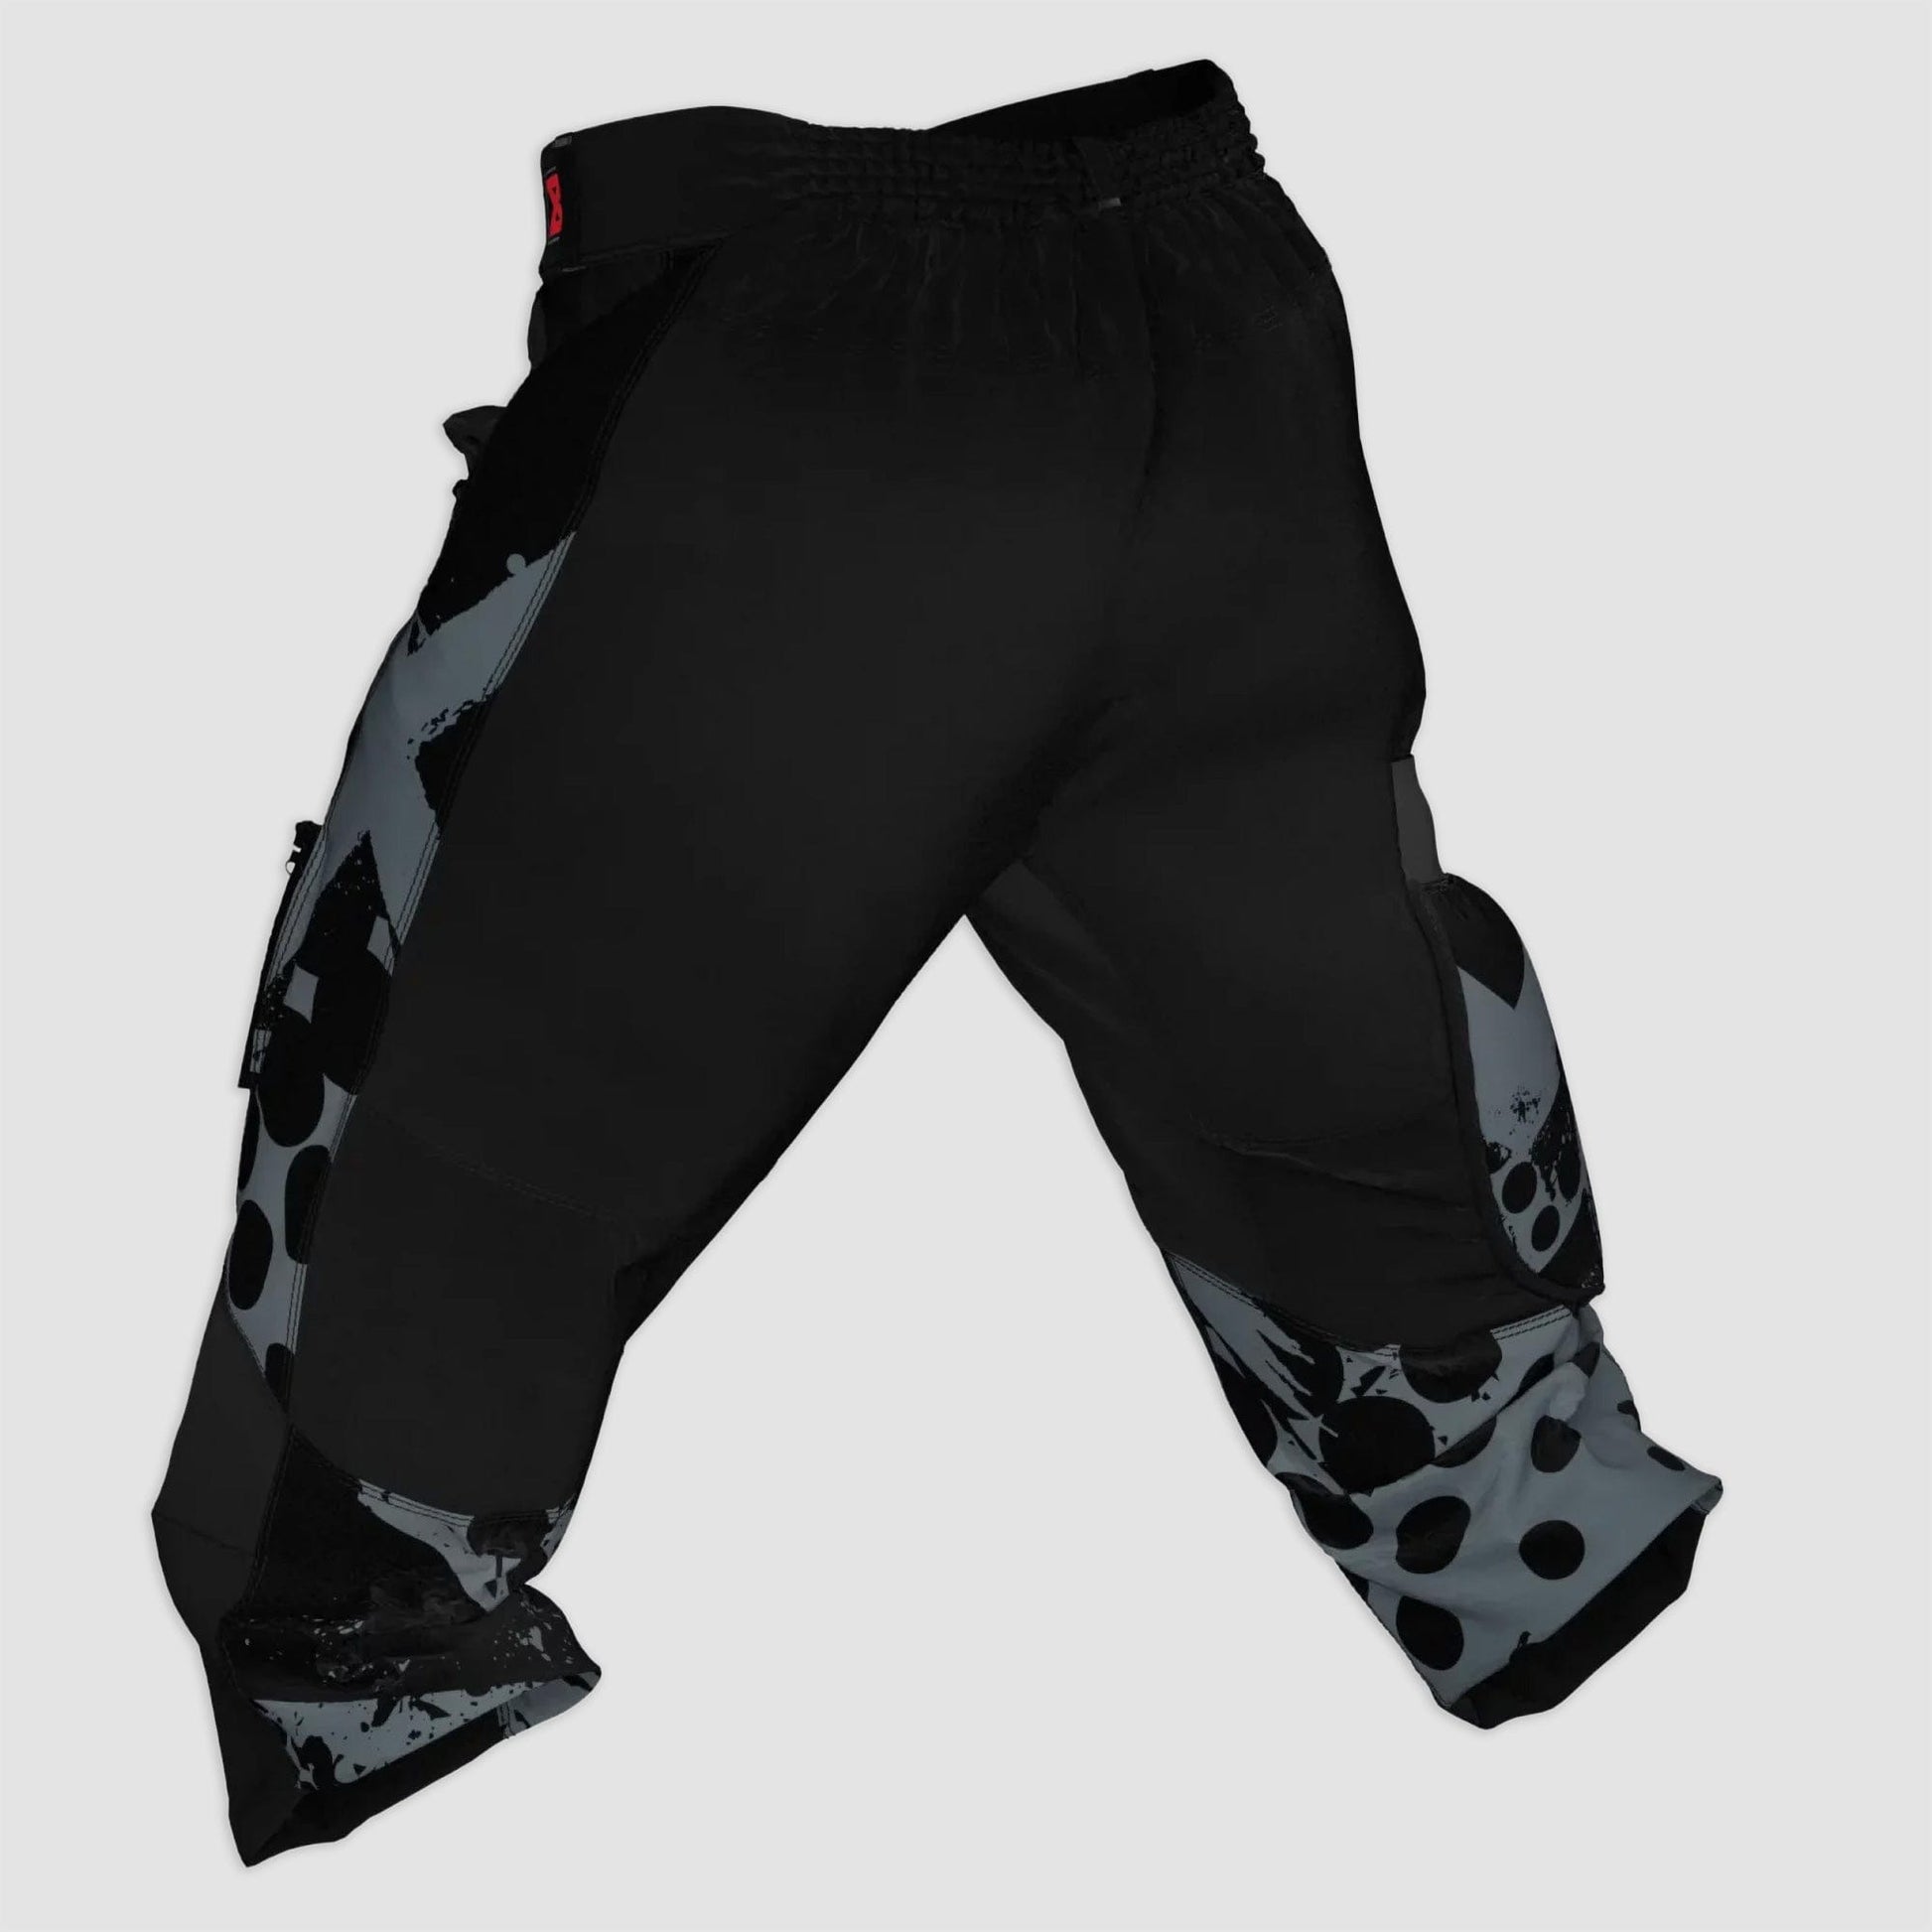 Manufactory Apparel Physical product Dynamx MX Series CP Shorts